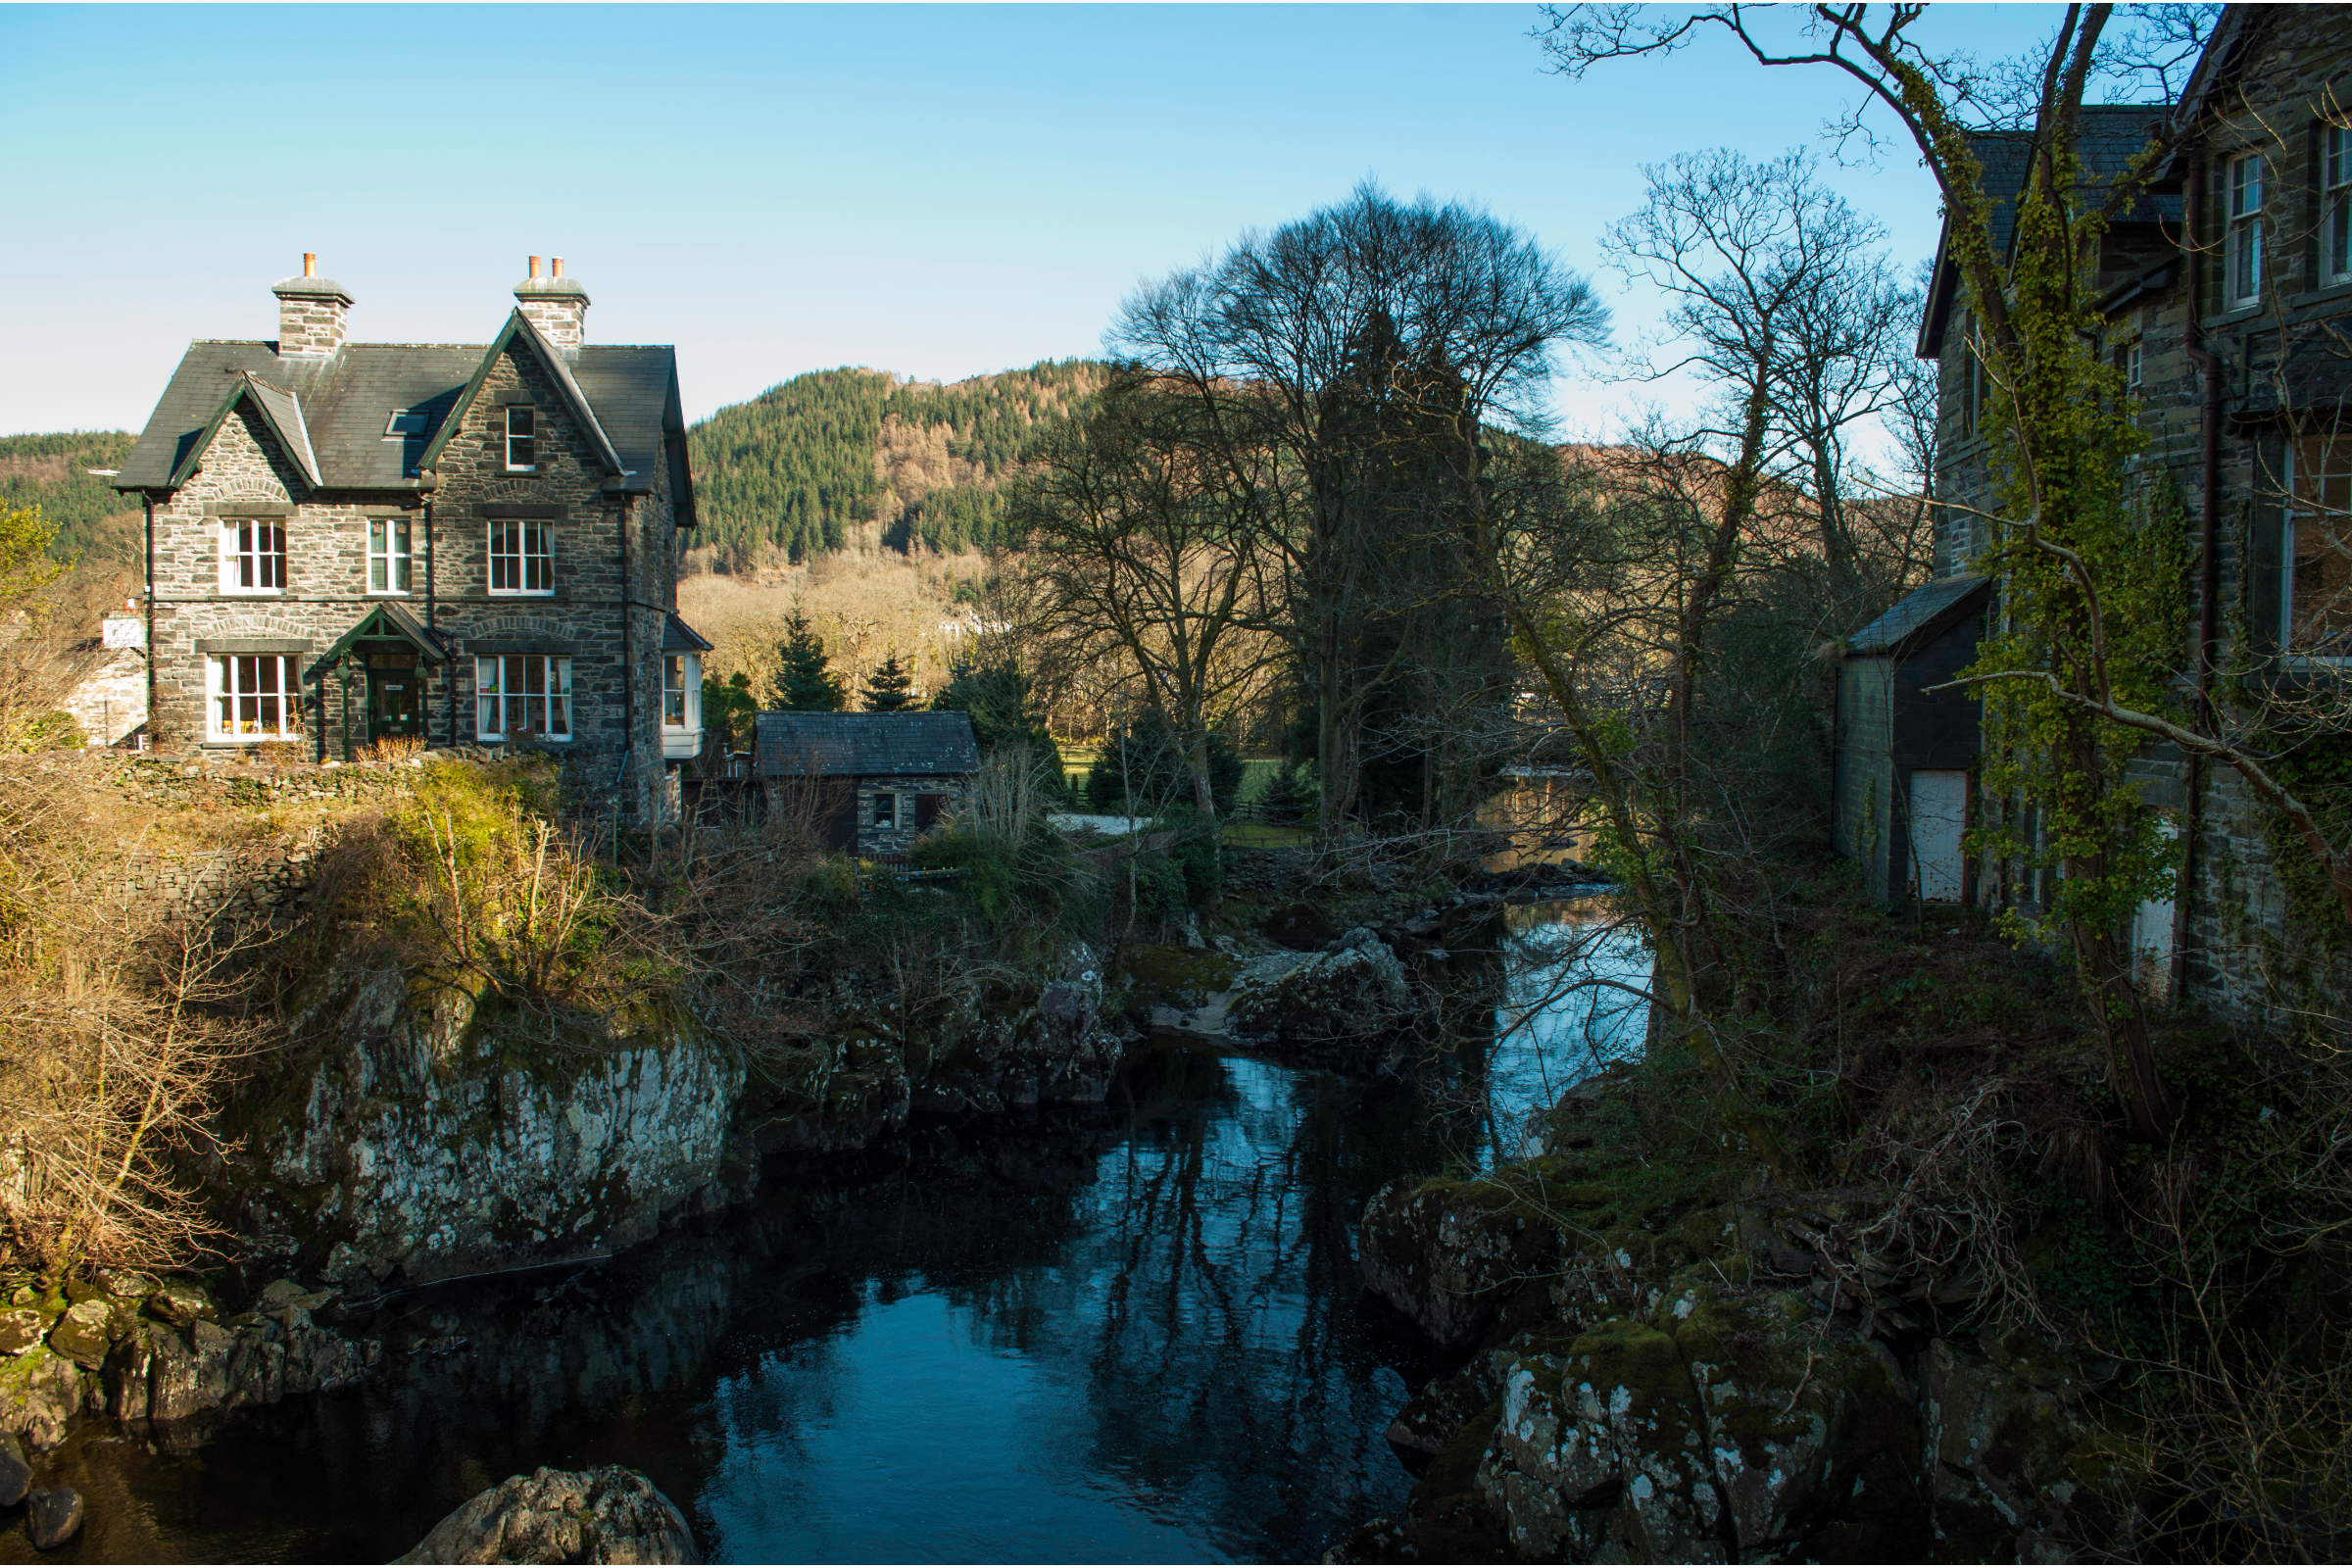 View of Betws-y-coed village with scenic backdrop